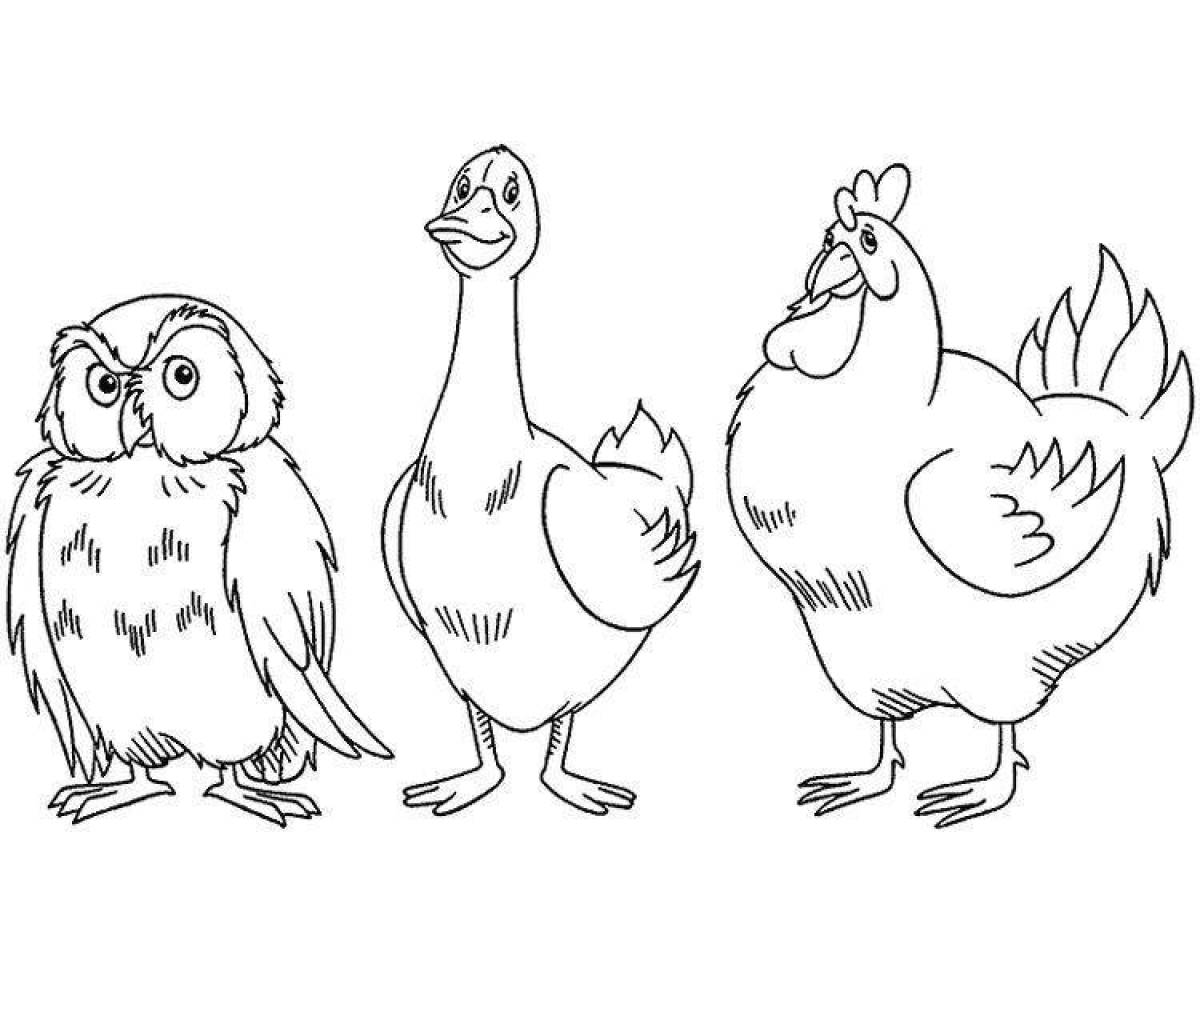 Amazing poultry coloring page for 3-4 year olds